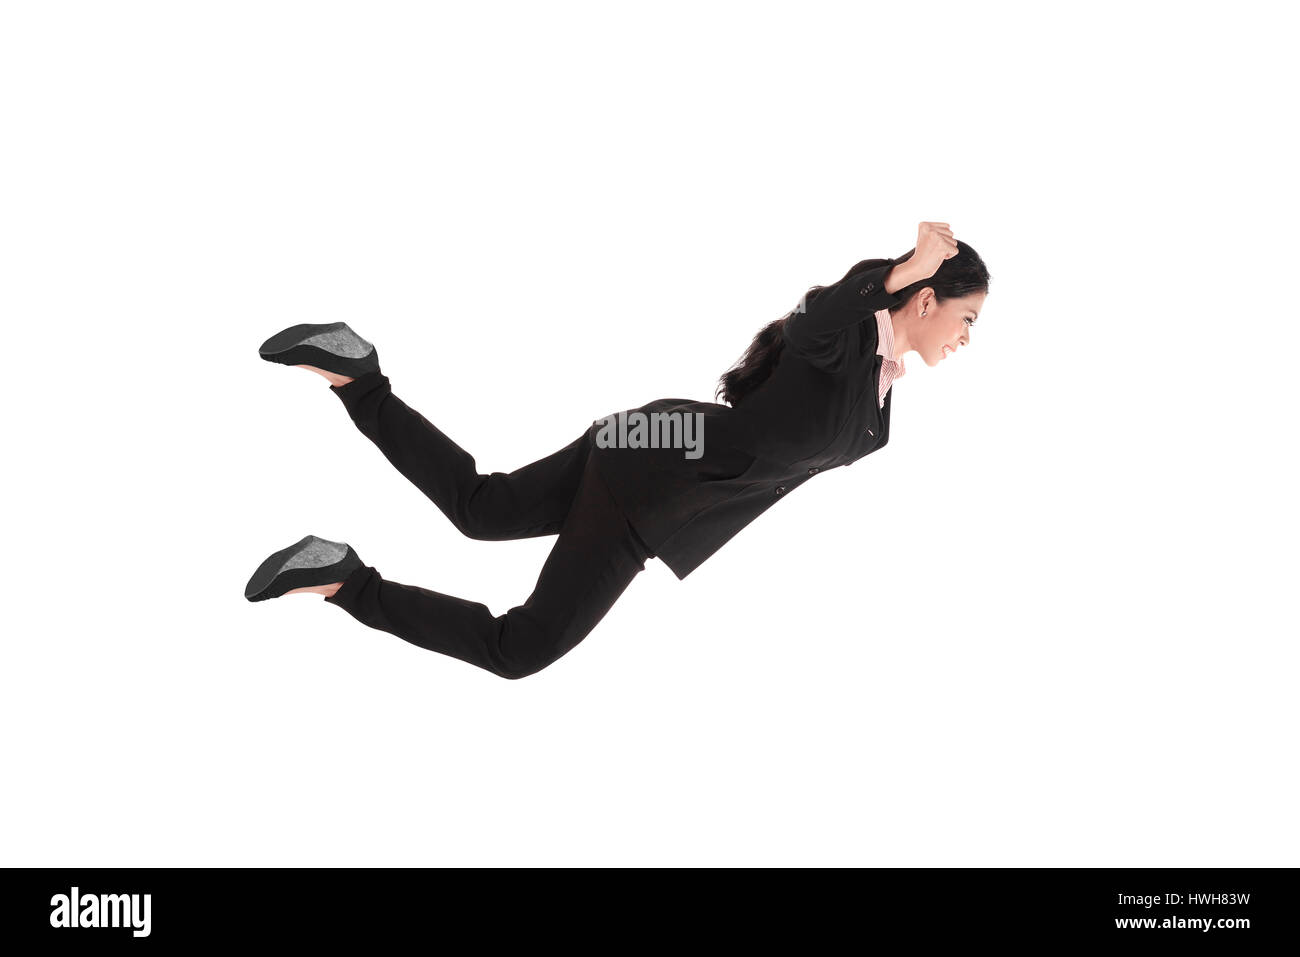 Falling and screaming business woman in formal wear over white background Stock Photo